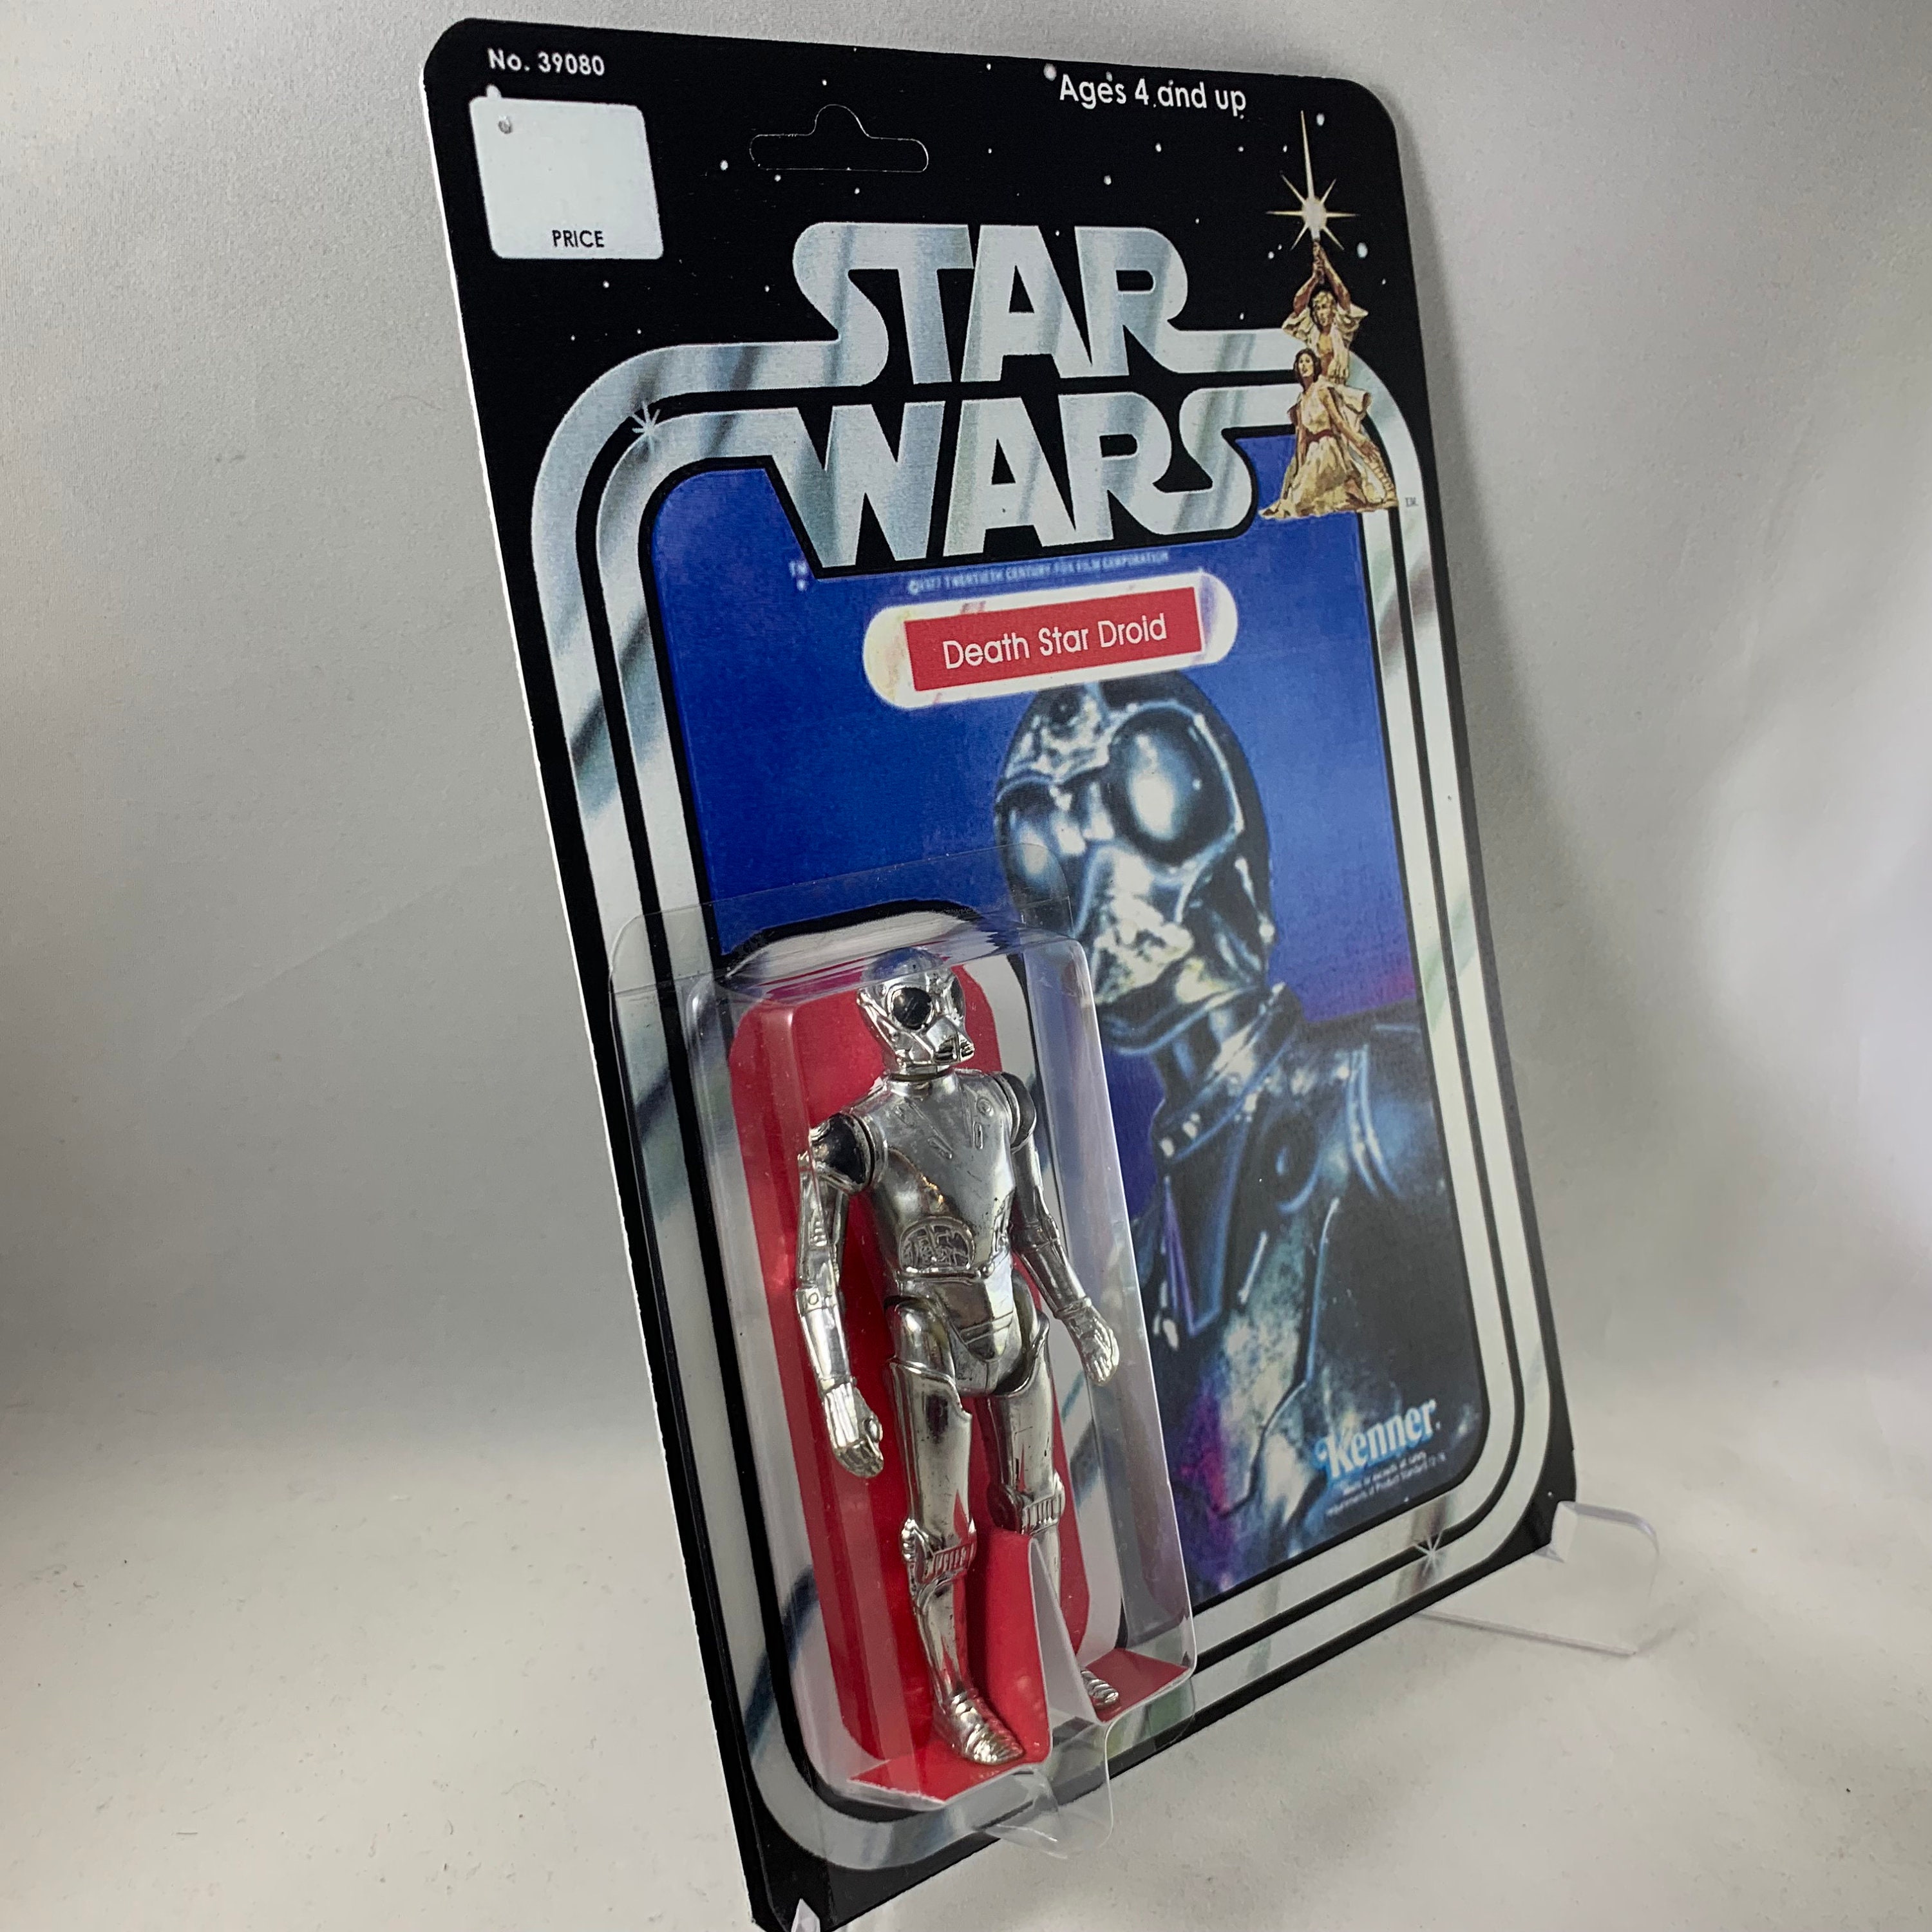 D3-09 could become the rarest Star Wars figure of the modern age - but will  anyone care? : r/starwarscollecting